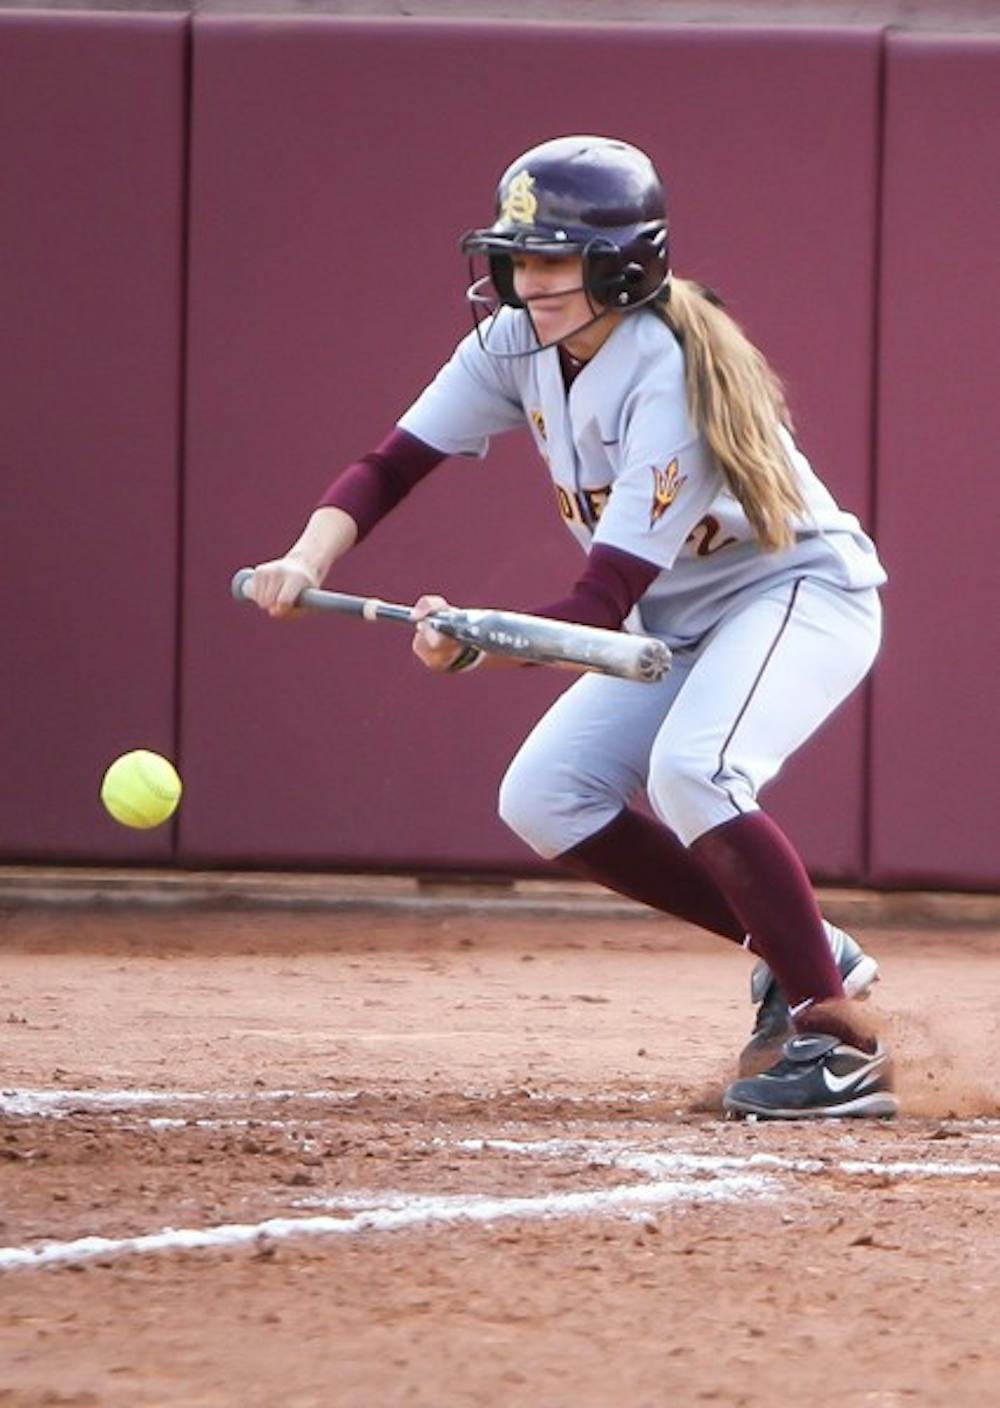 Junior outfielder Bailey Wigness bunts a ball during the Sun Devils' 3-0 win over Bradley on Feb. 10. Wigness will fill in for junior outfielder Alix Johnson, who has been suspended indefinitely for undisclosed reasons in ASU's home series against Washington this weekend. (Photo by Sam Rosenbaum)